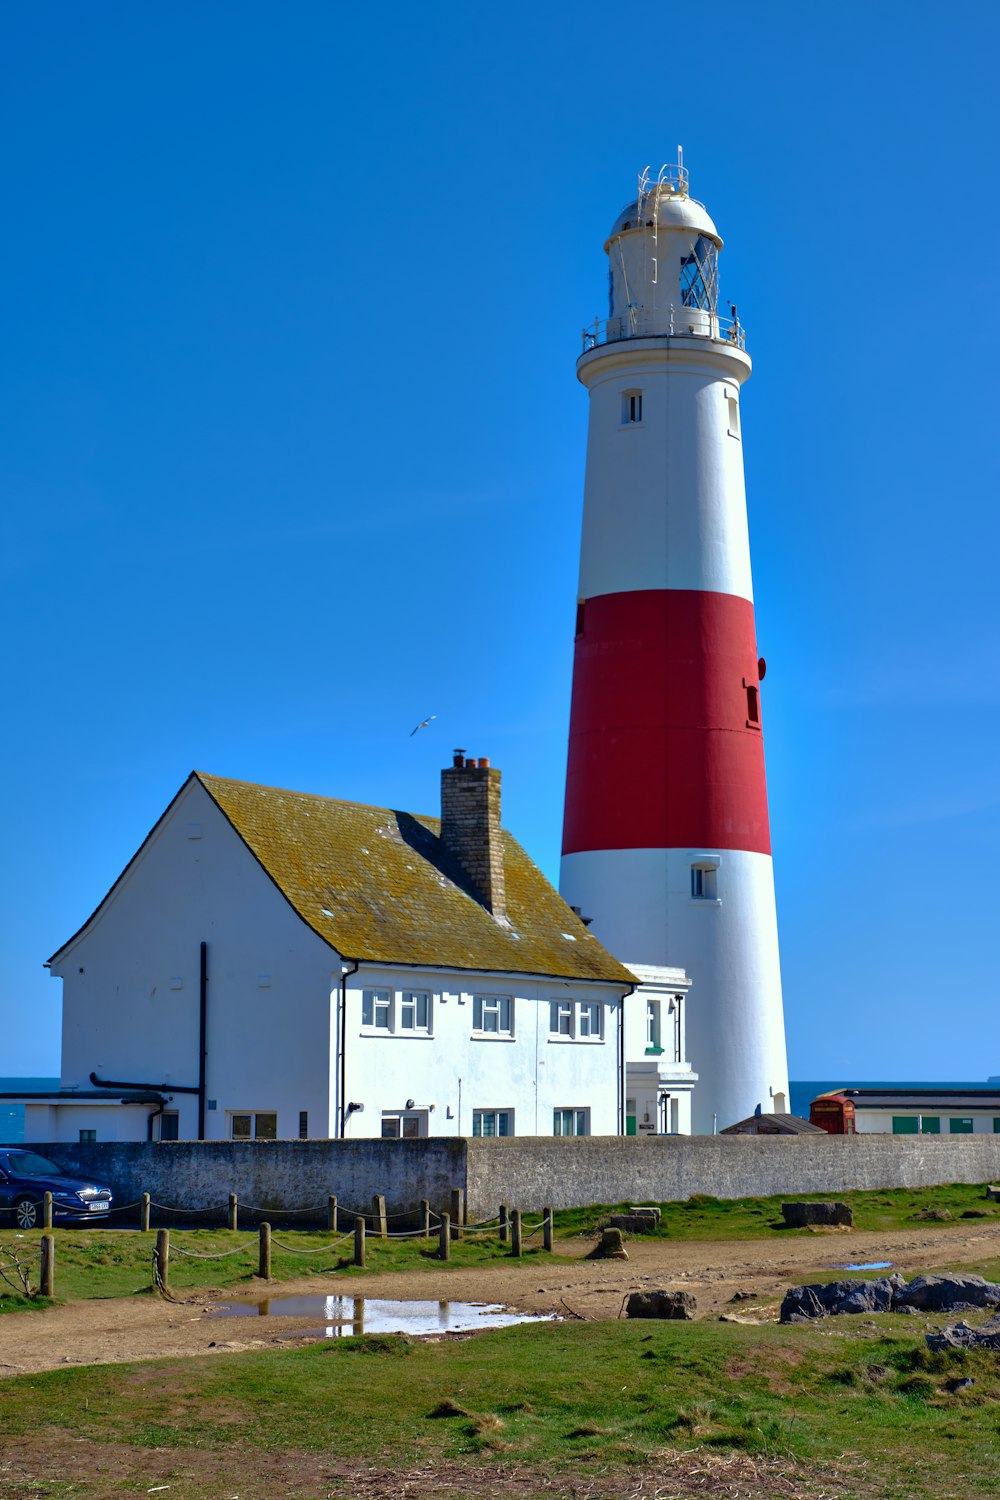 a red and white lighthouse next to a white building